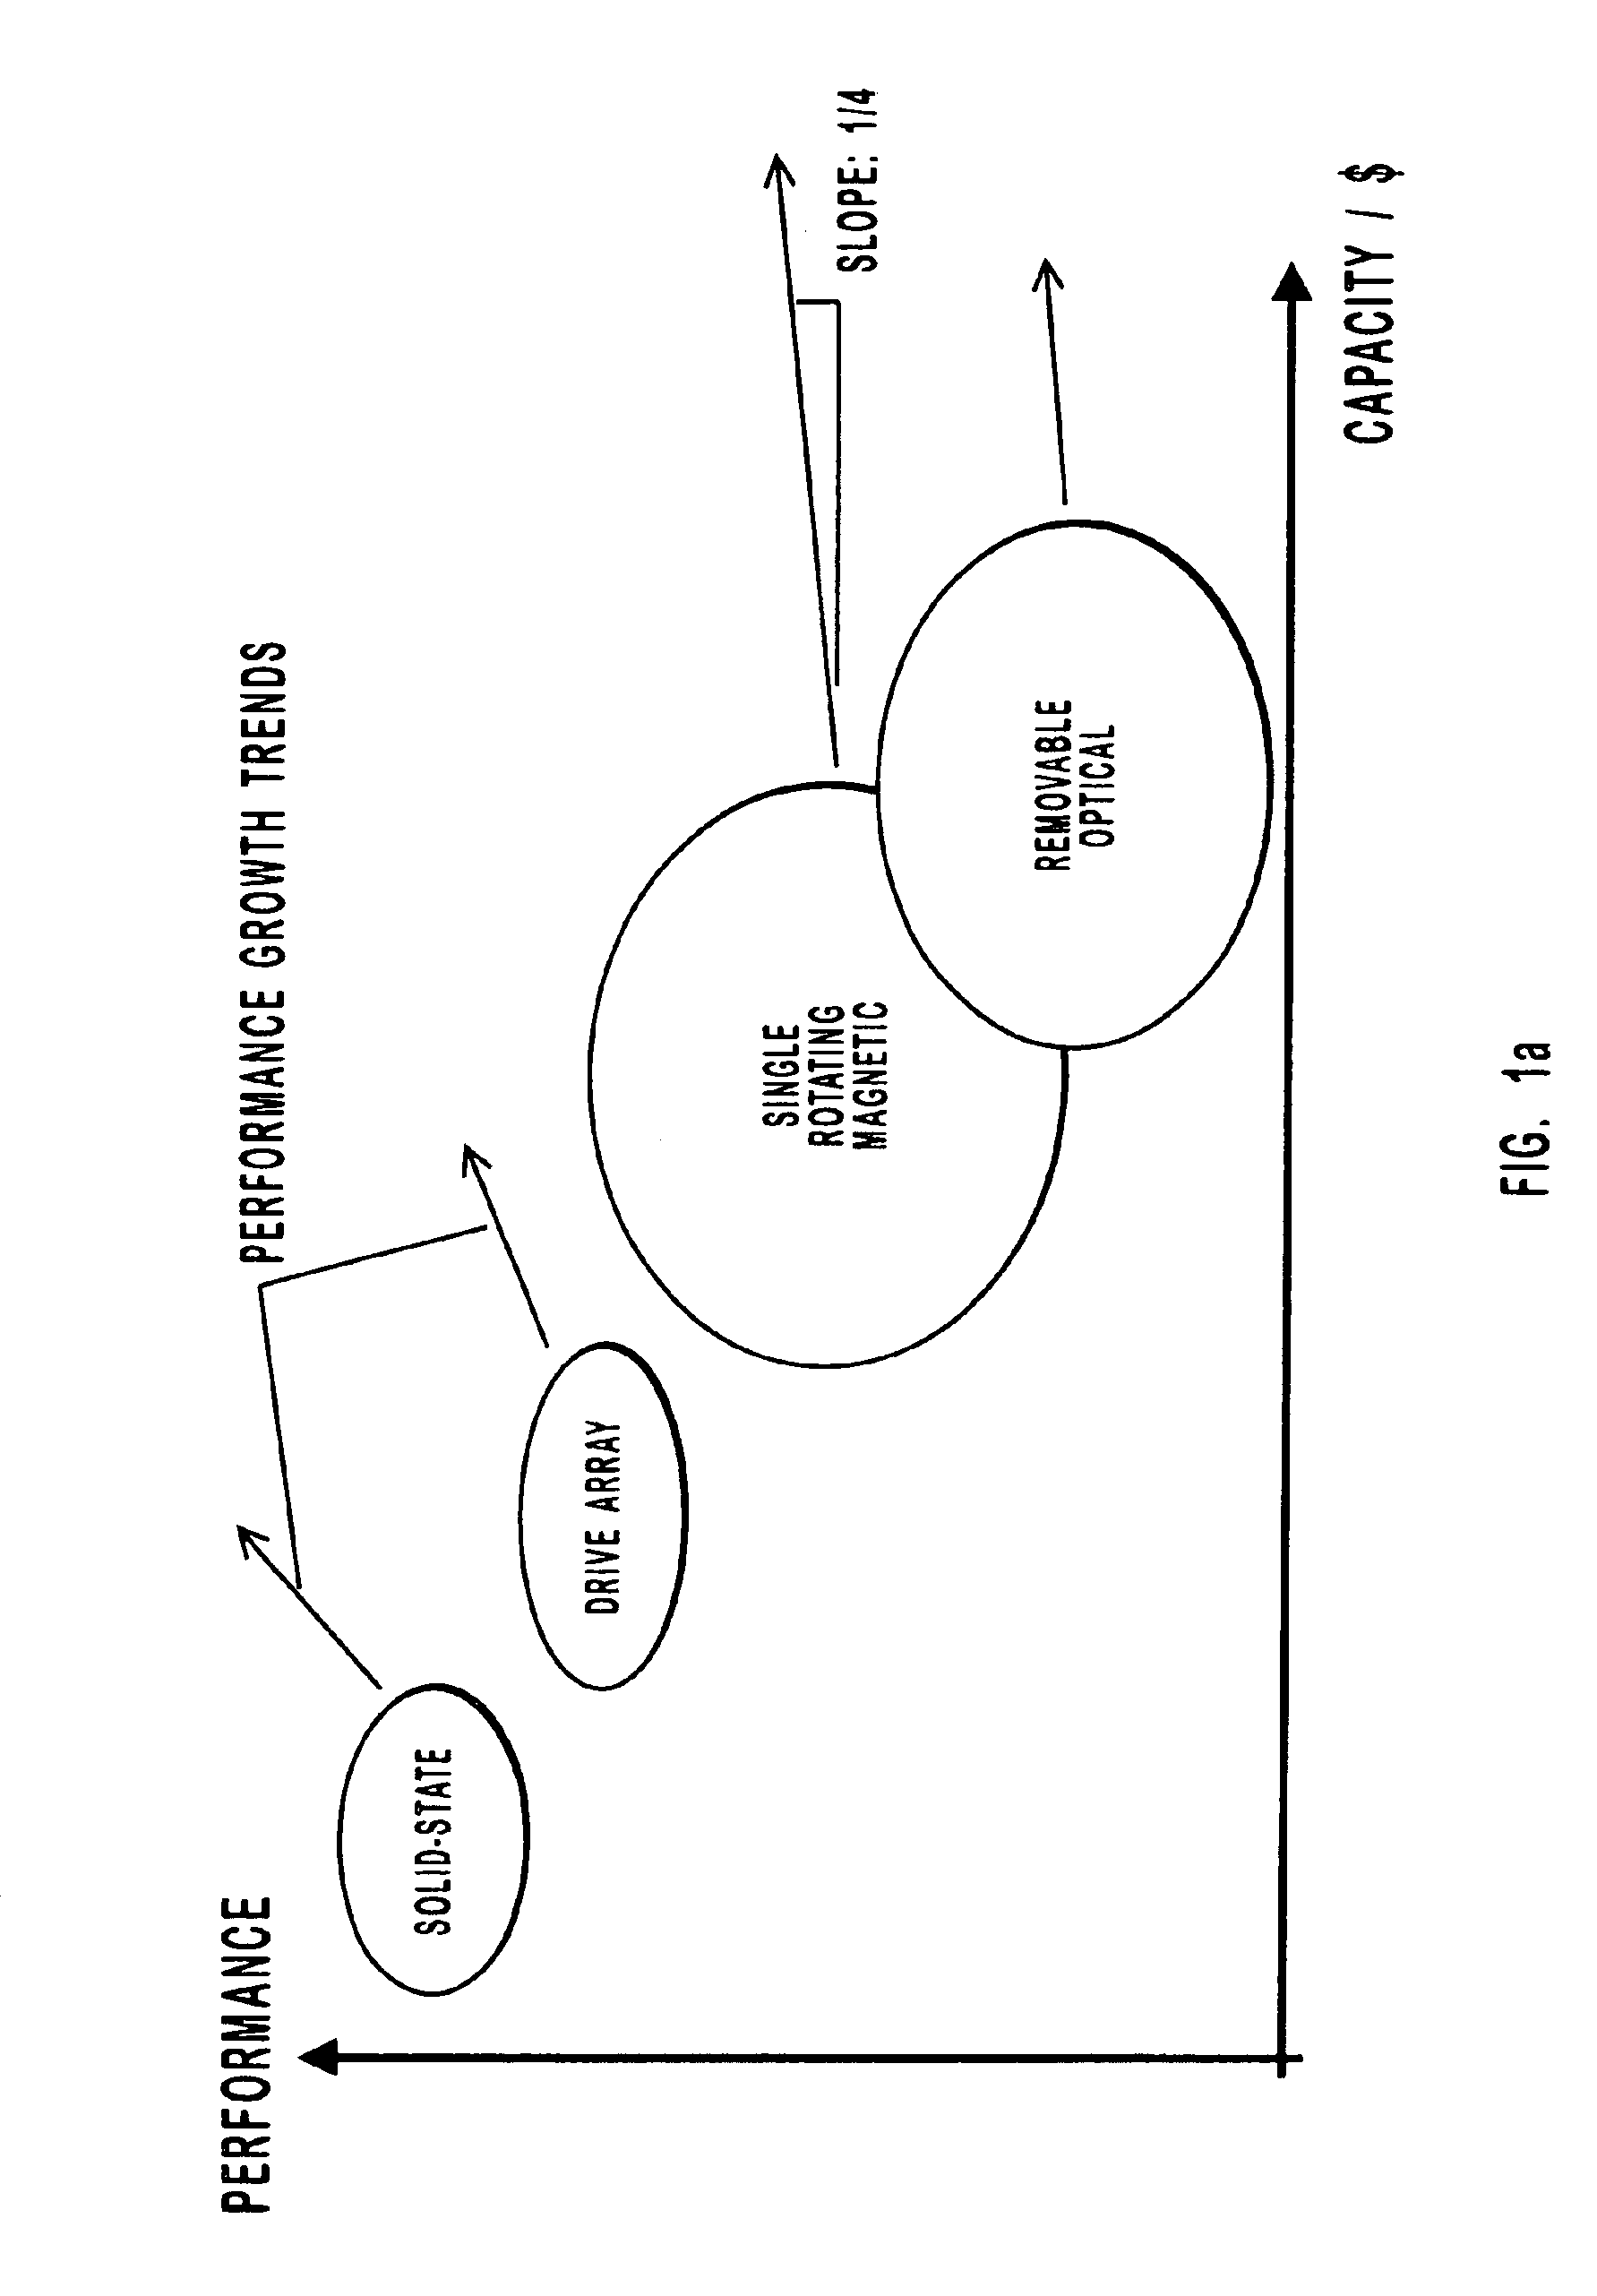 Integrated bidirectional Recording head micropositioner for magnetic storage devices